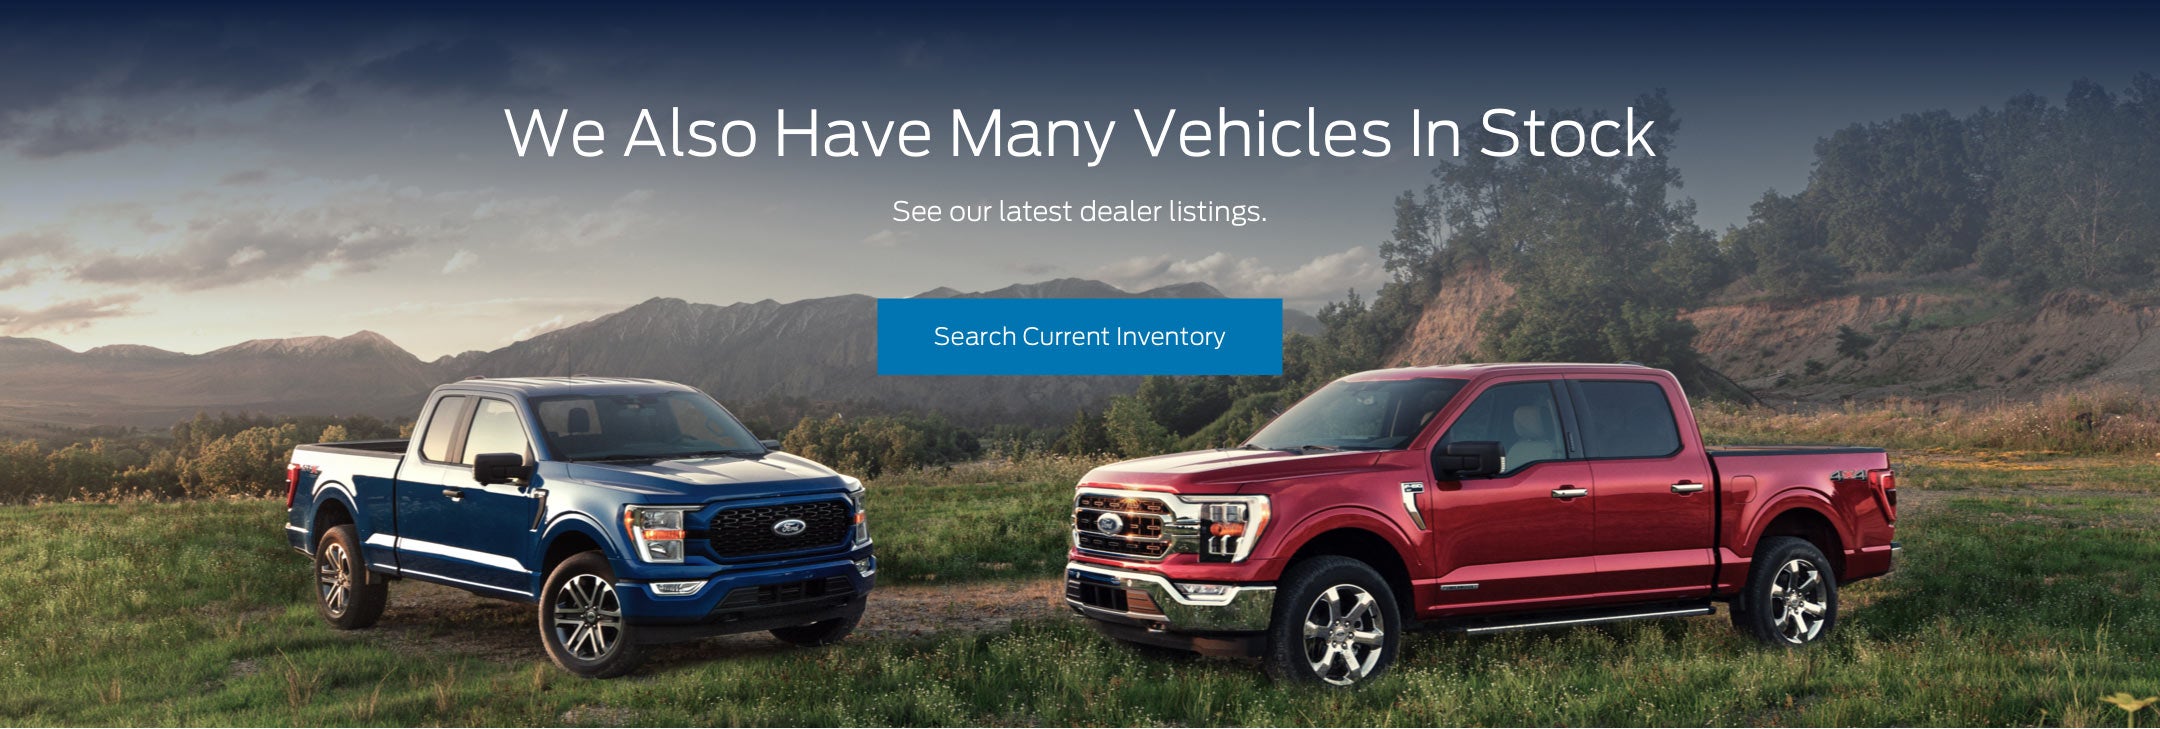 Ford vehicles in stock | Watertown Ford in Watertown MA